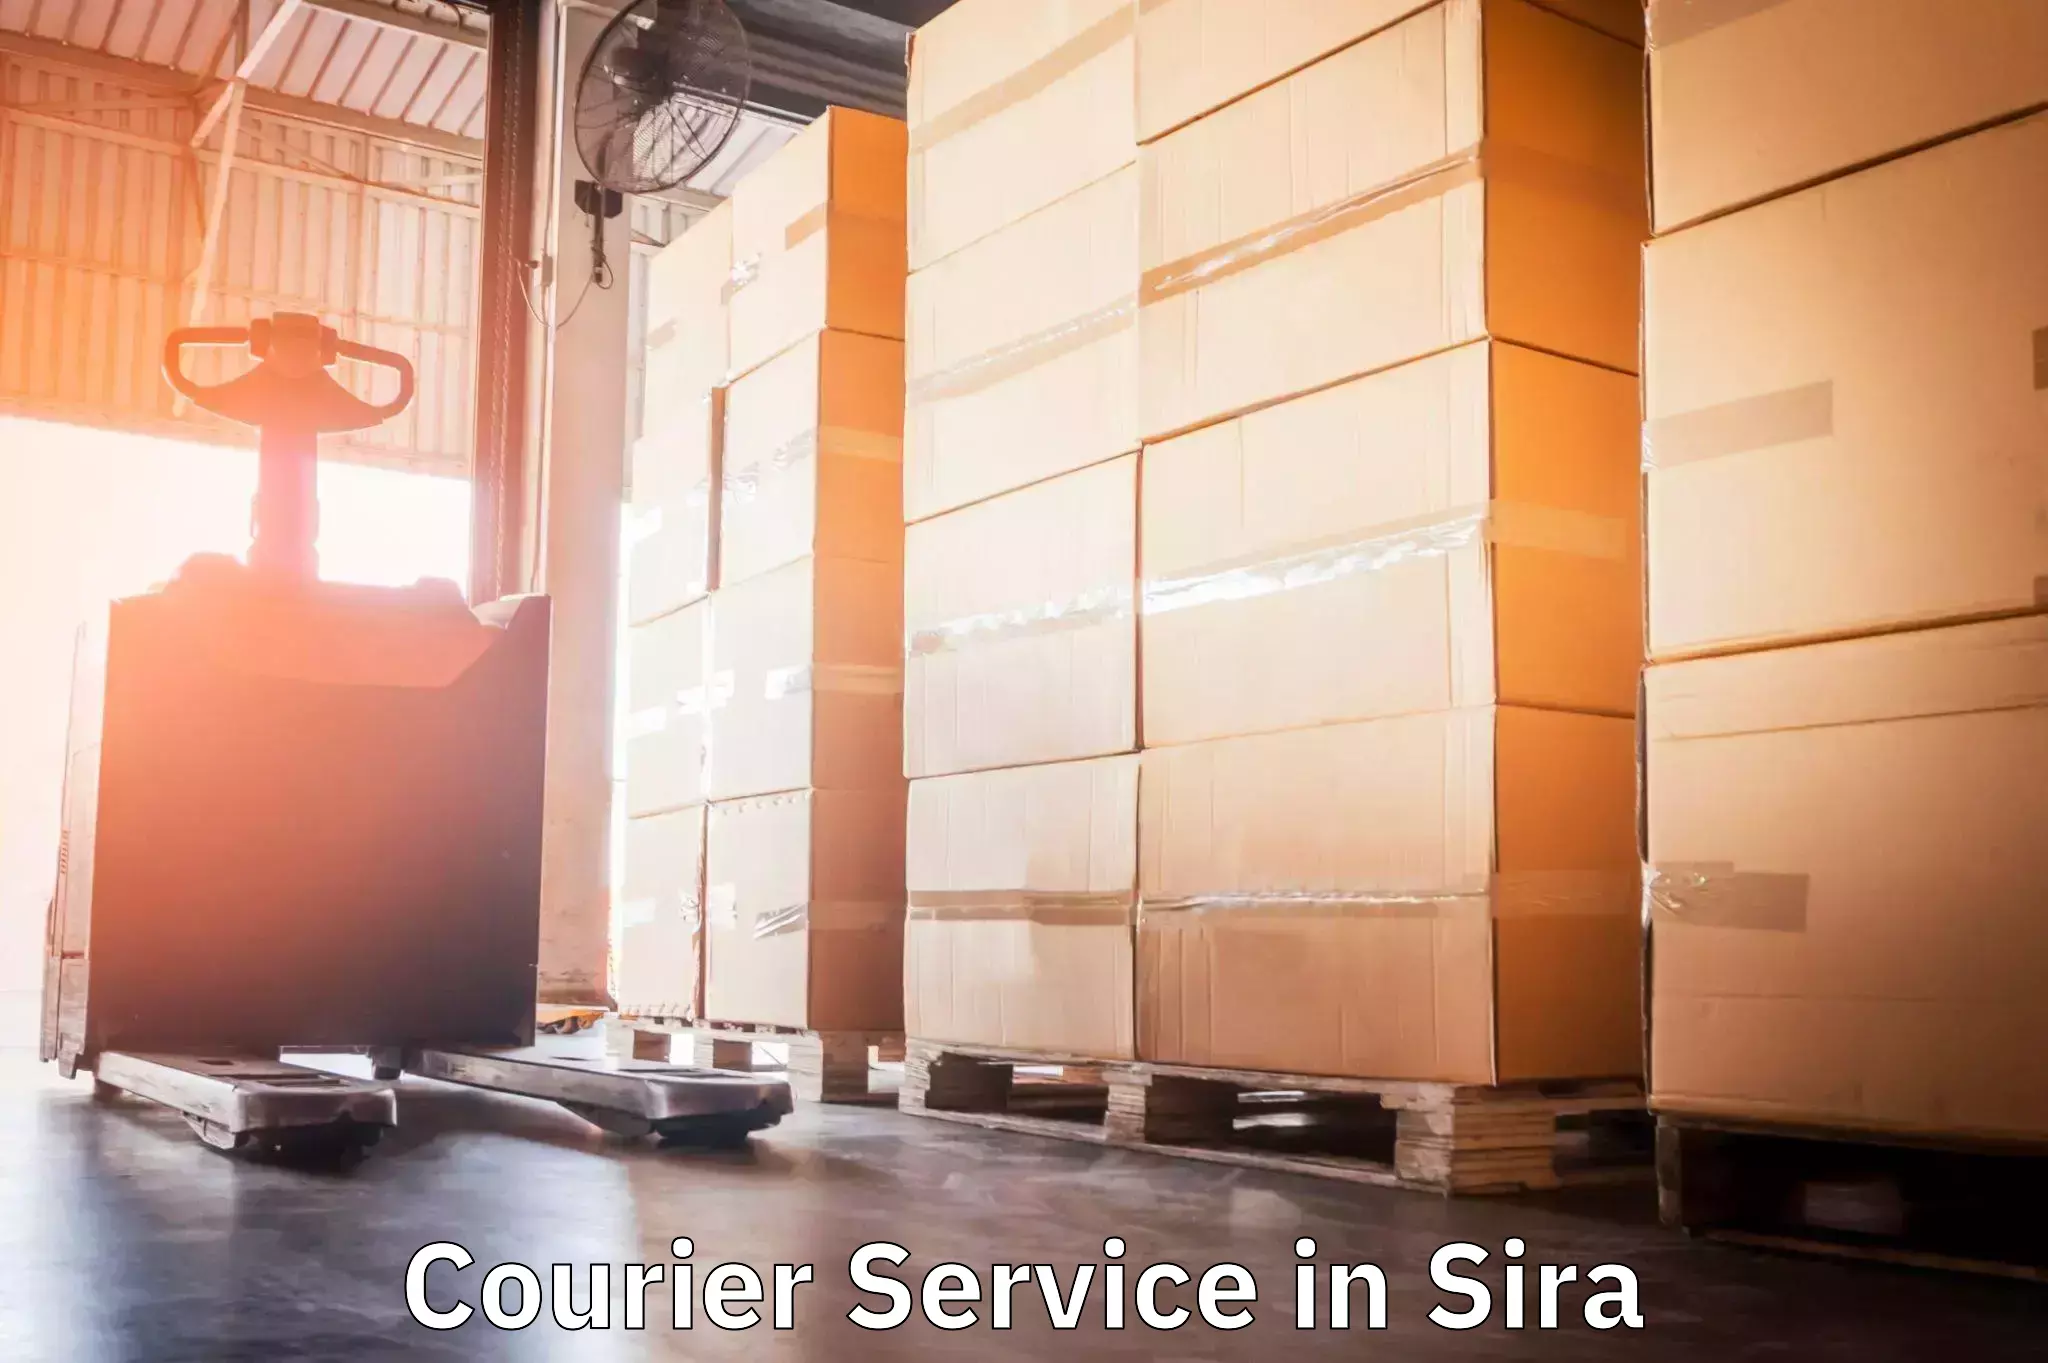 Personal parcel delivery in Sira